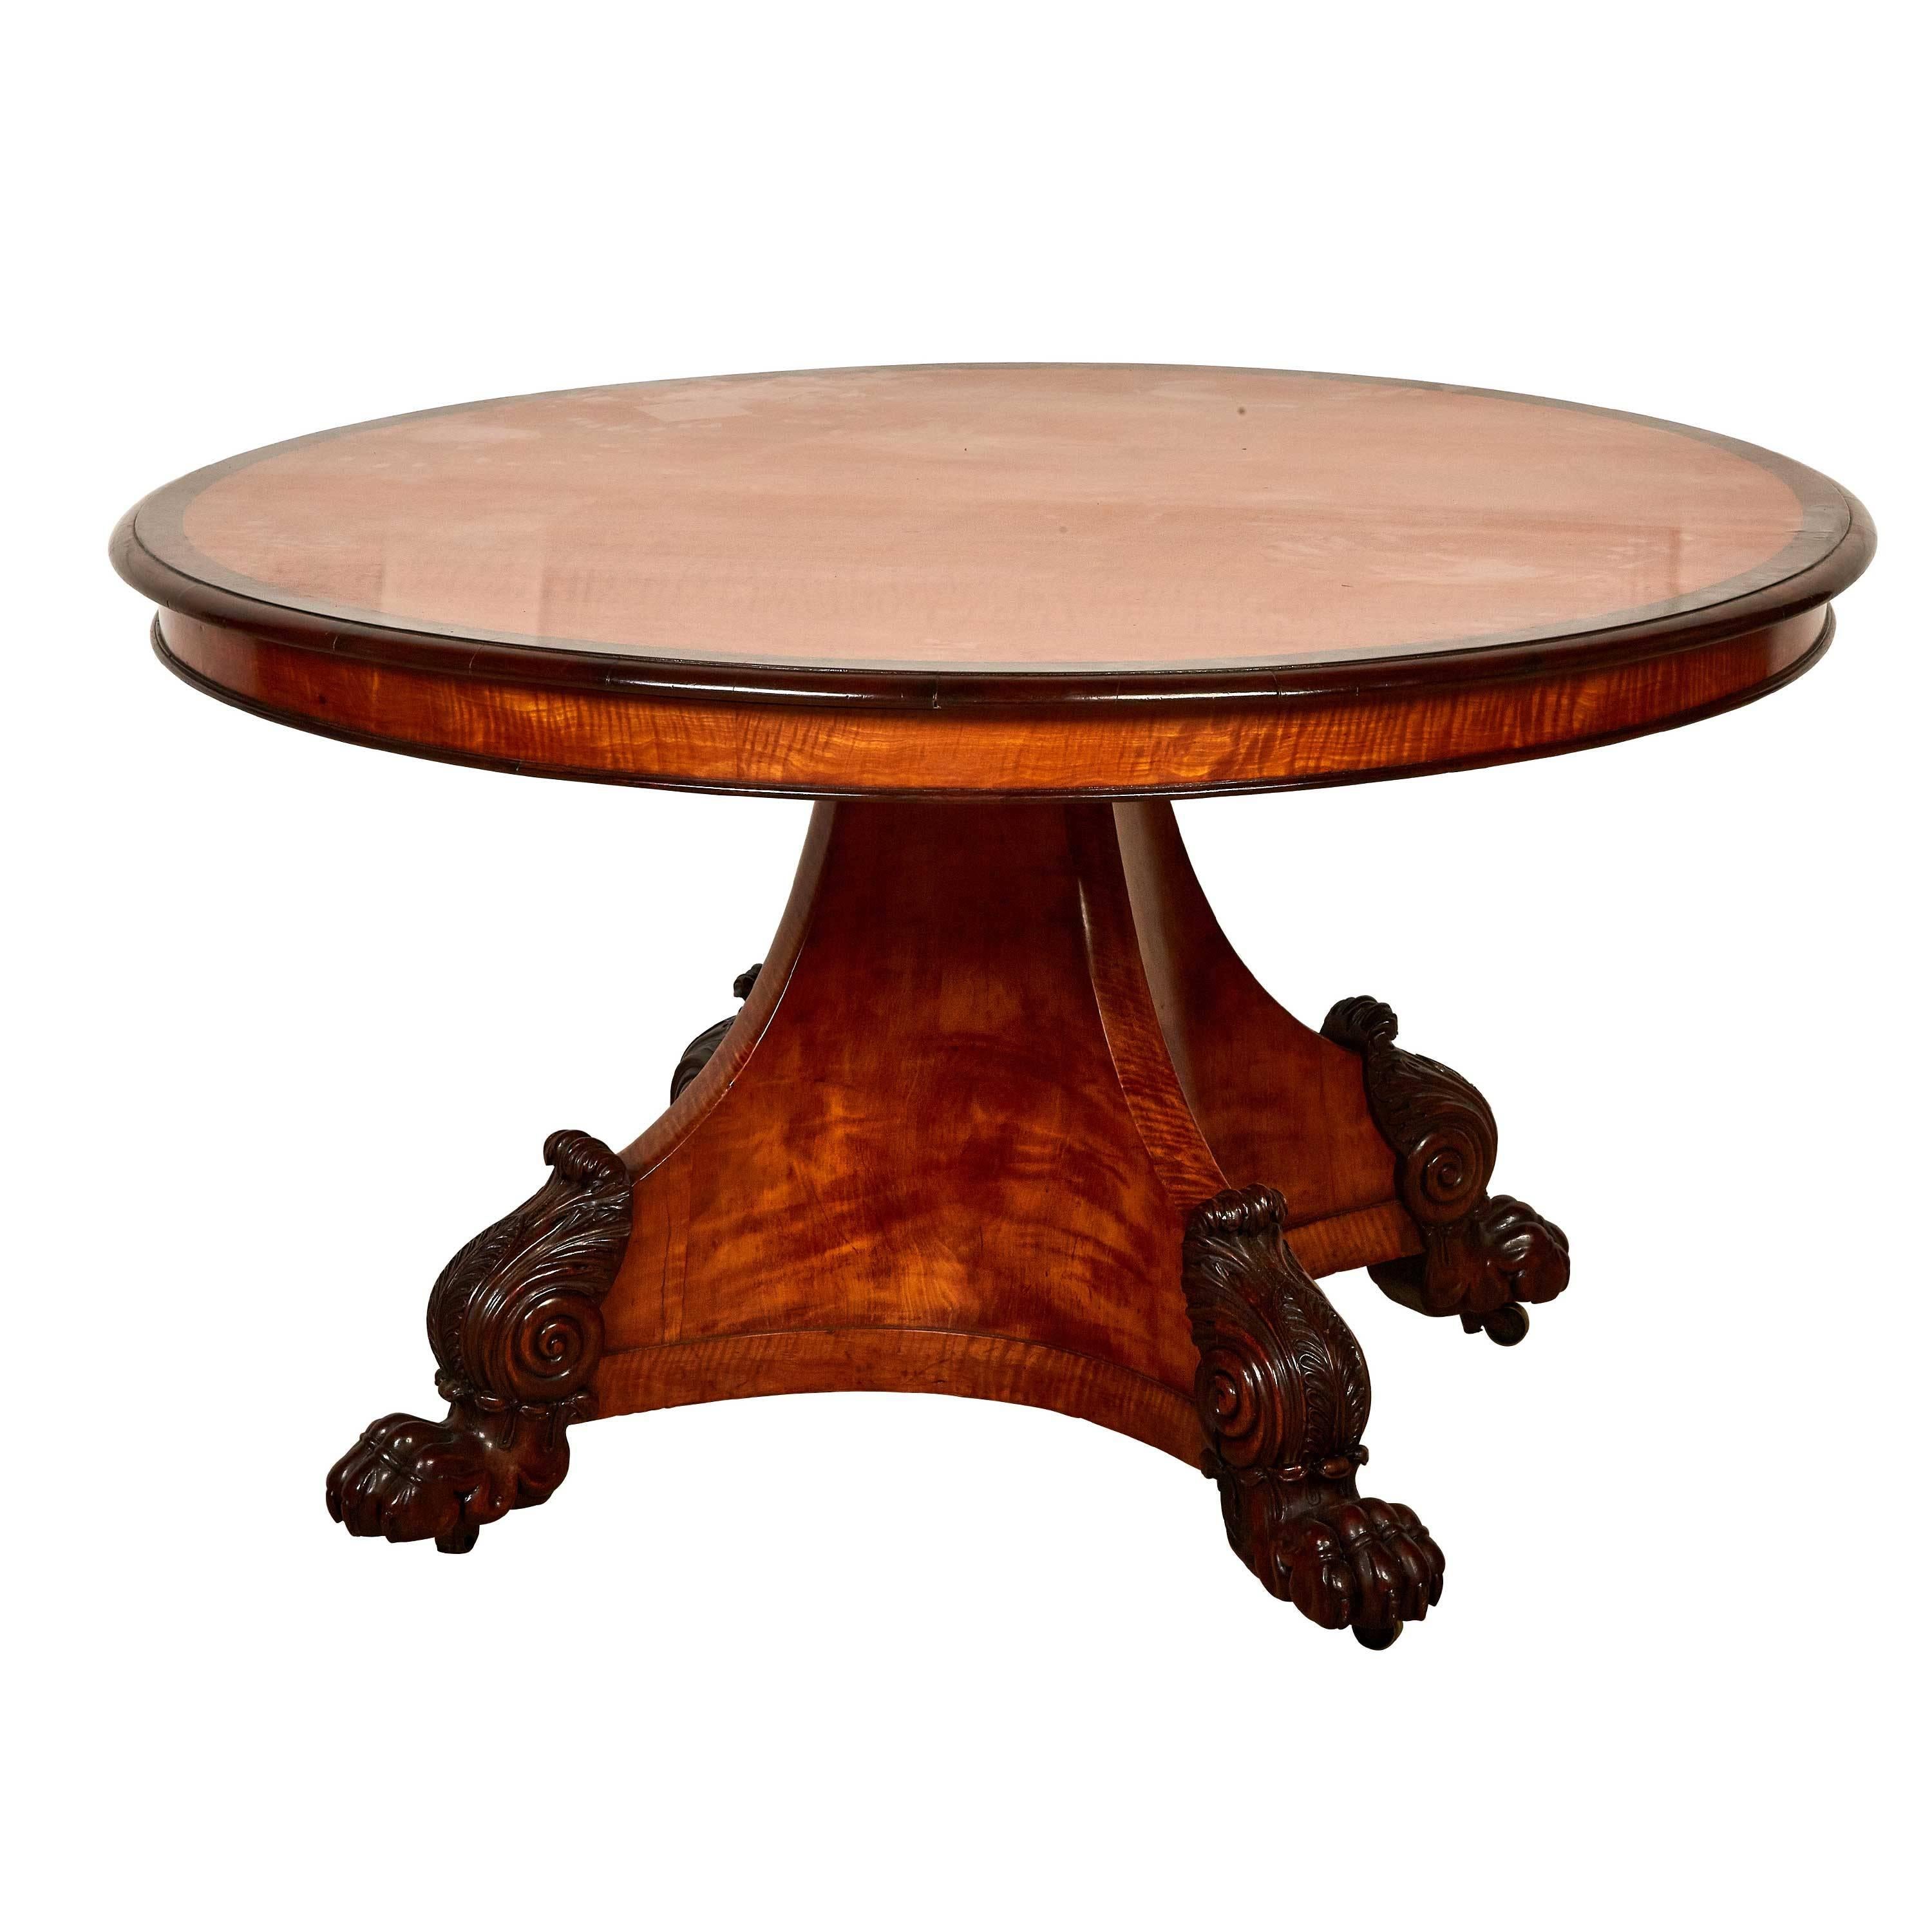 Very unusual breakfast table, satinwood with large mahogany lions paw feet.

William IV. 1830-1837.